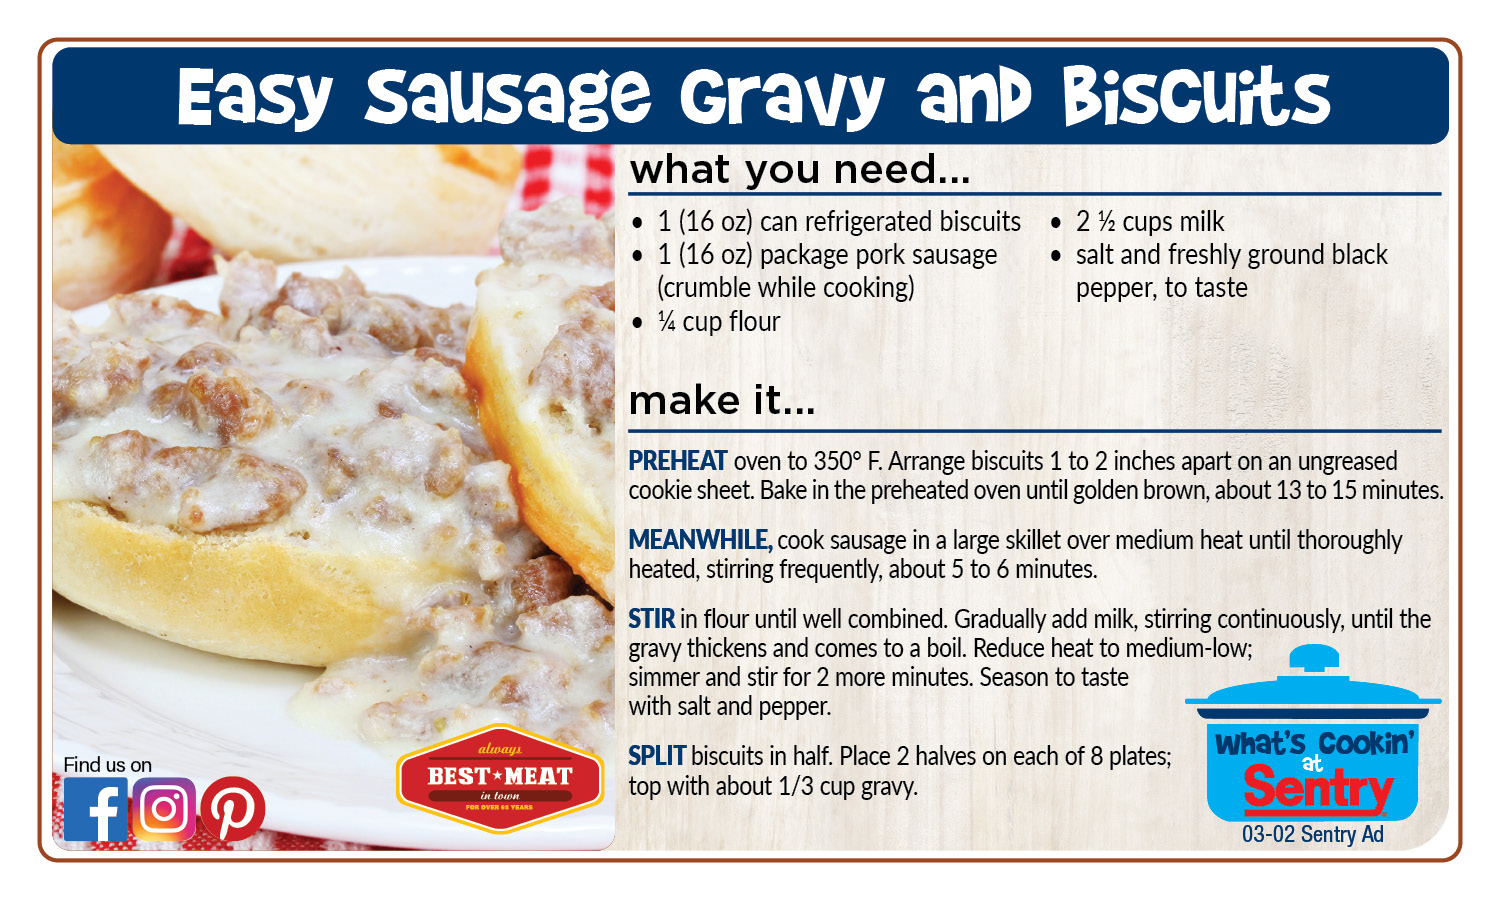 Recipe: Easy Sausage Gravy and Biscuits